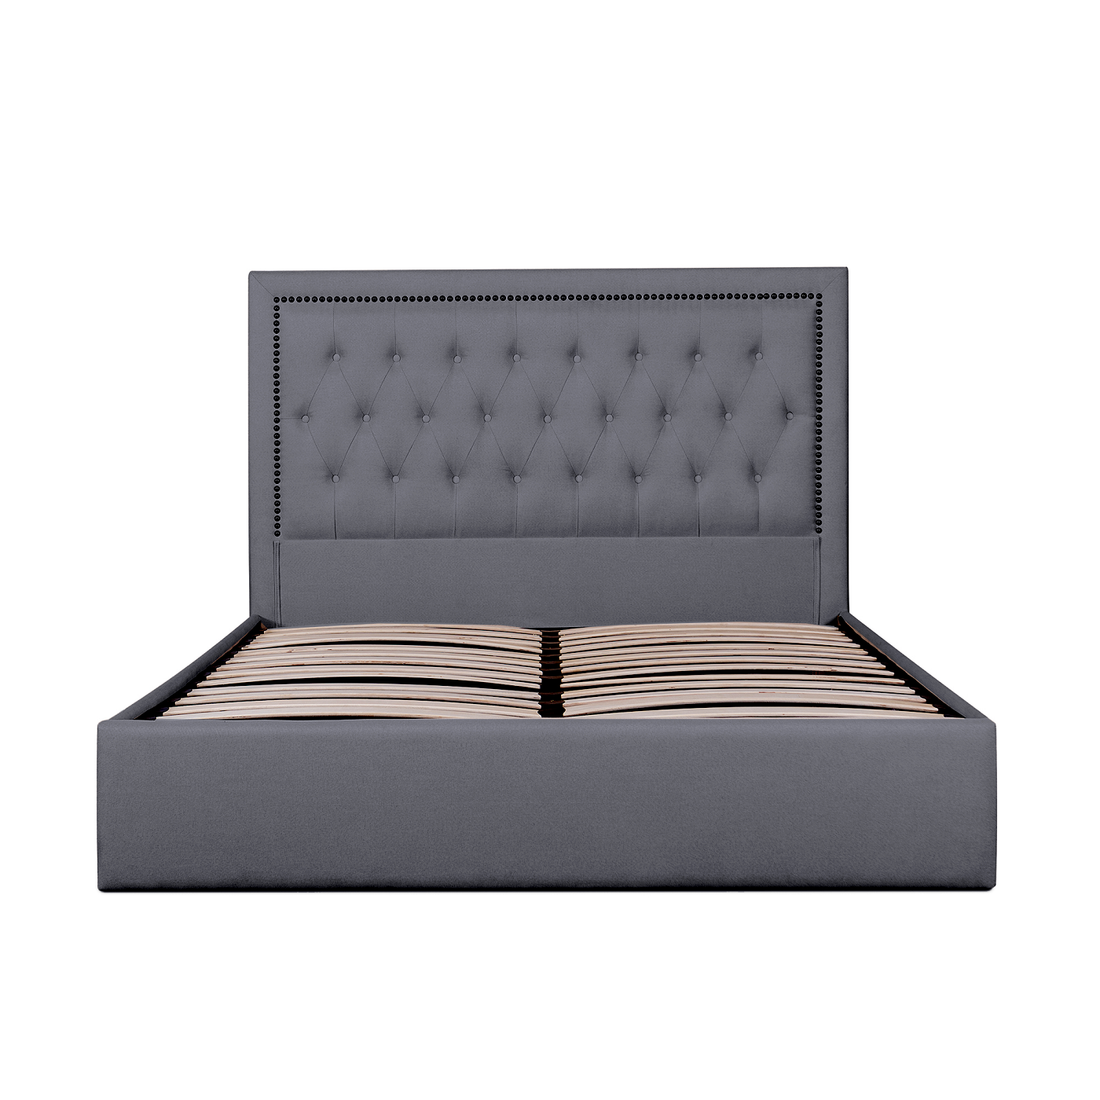 Addison Fabric Queen Bed Frame in Lunar Grey with Tufted Headboard